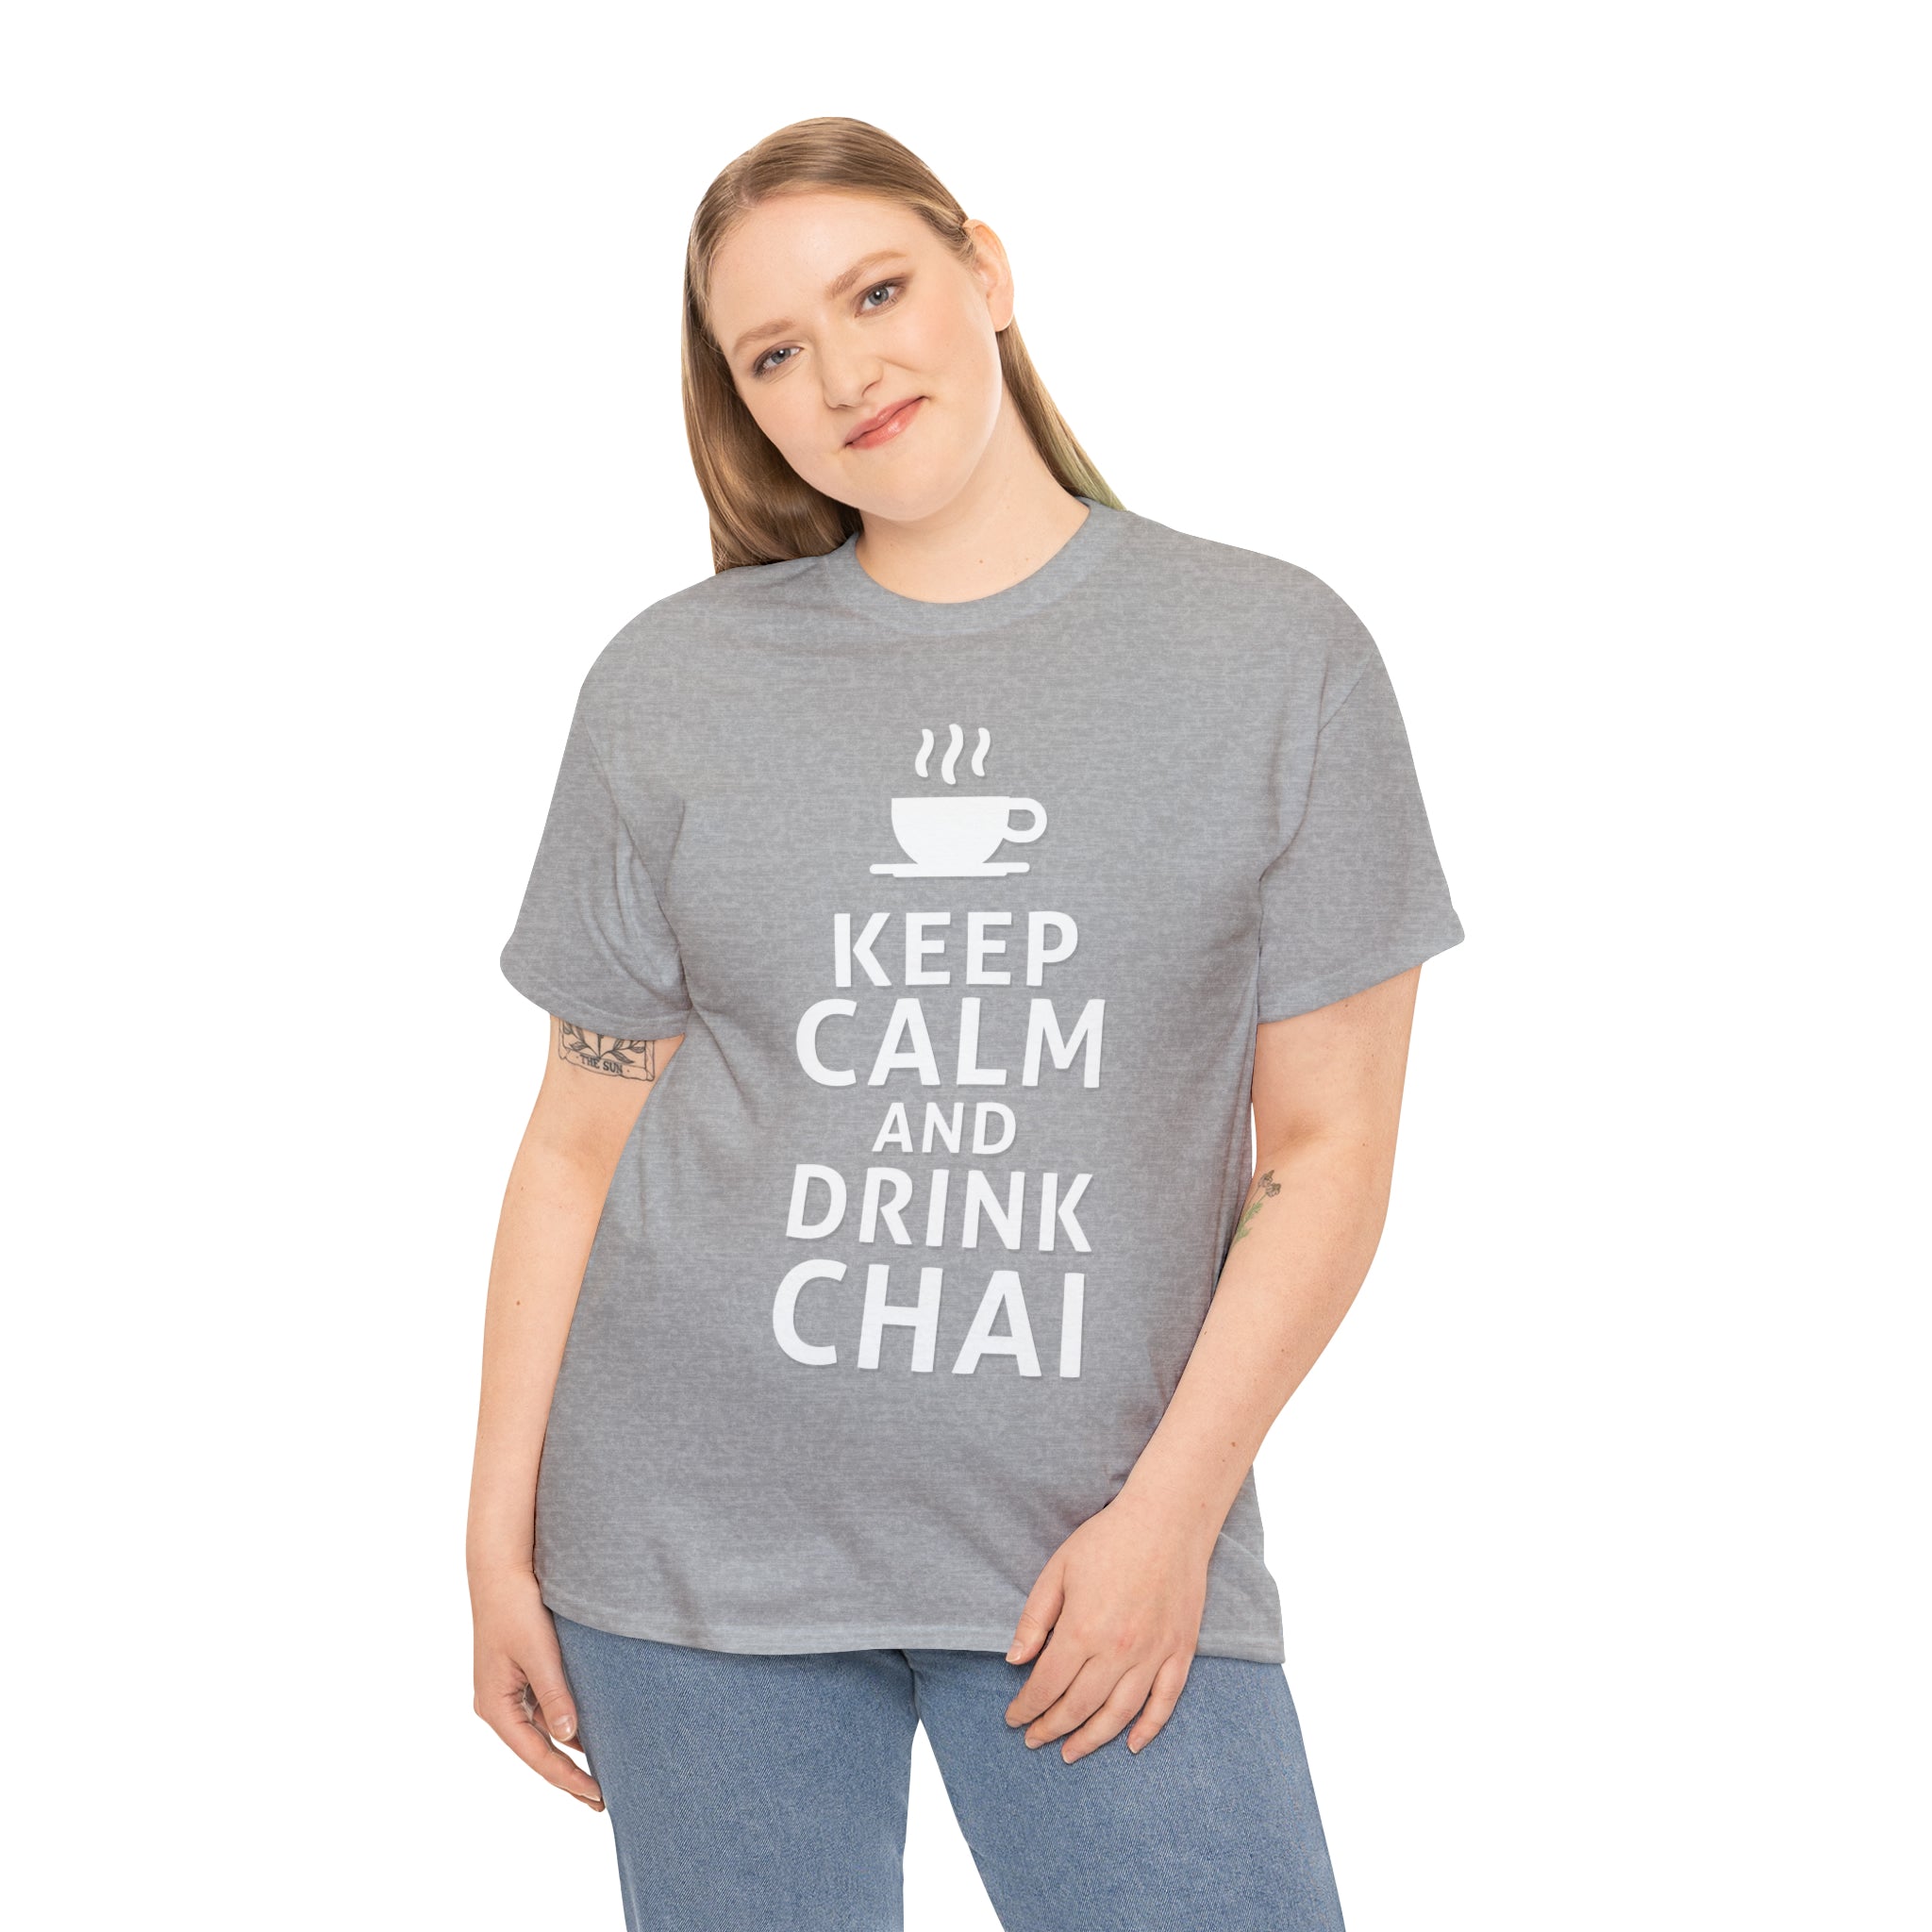 Keep Calm and Drink Chai T-Shirt Designs by C&C